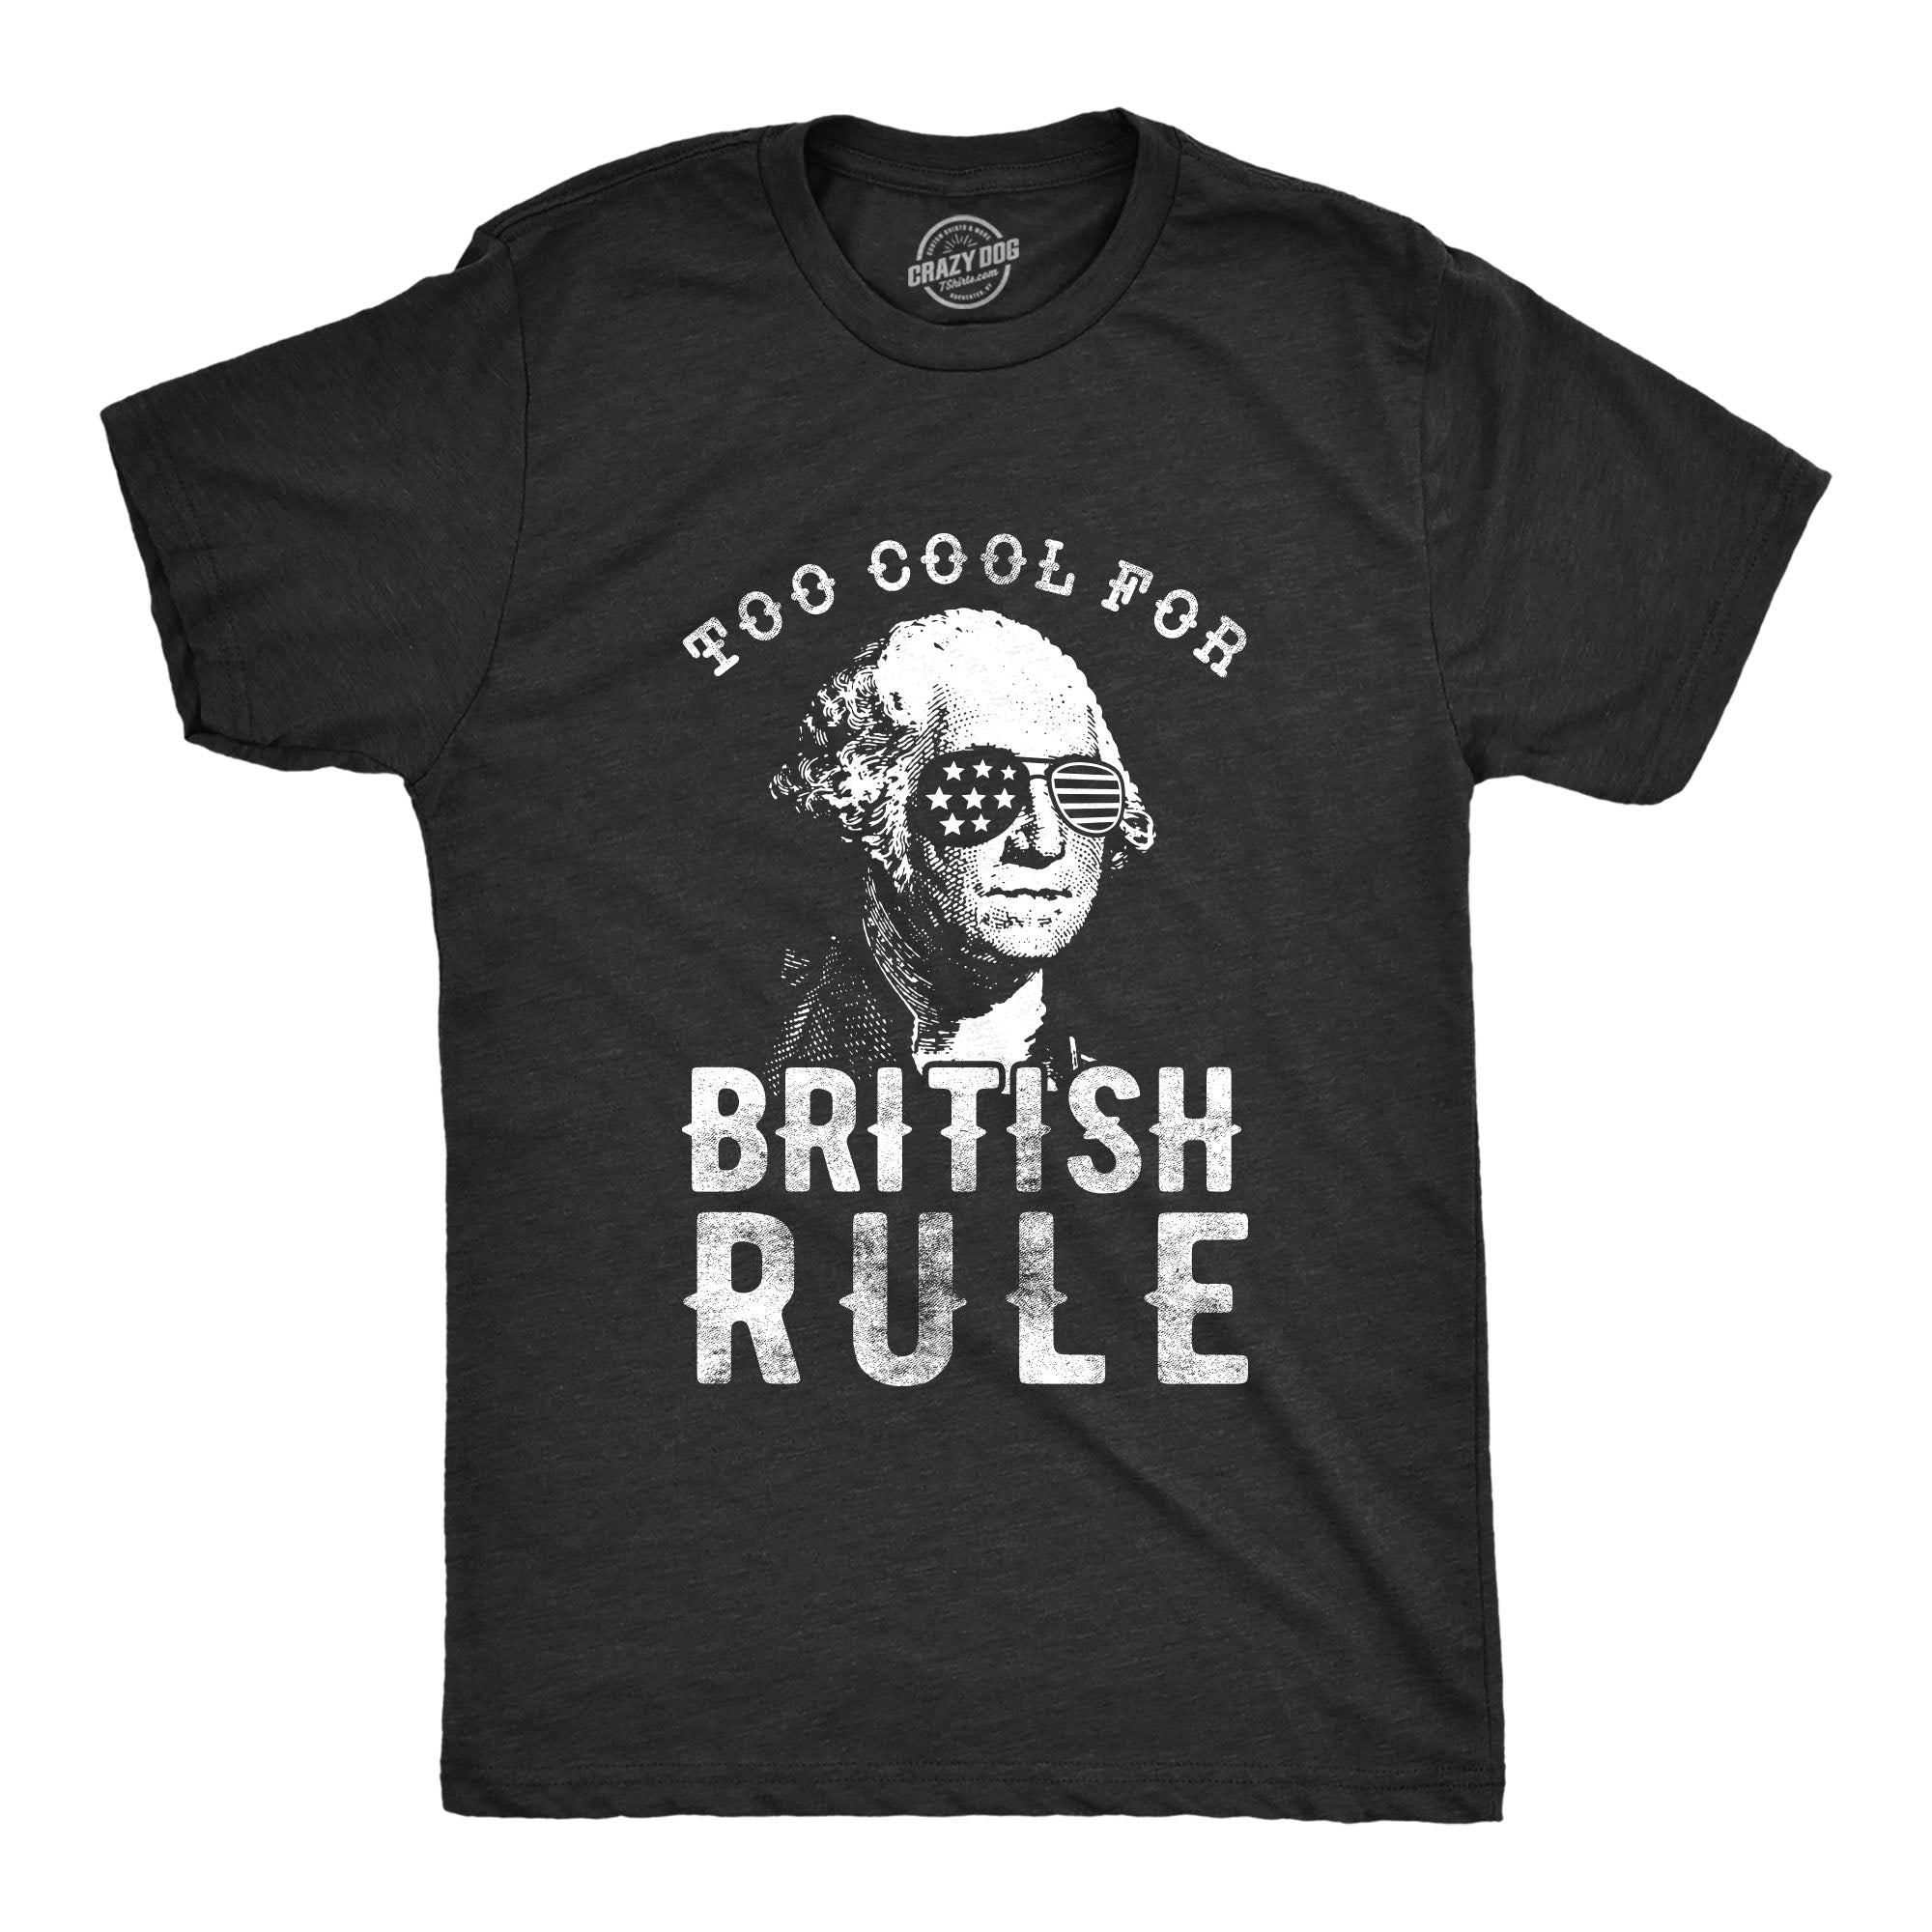 Funny Heather Black - Too Cool Too Cool For British Rule Mens T Shirt Nerdy Fourth of July Tee